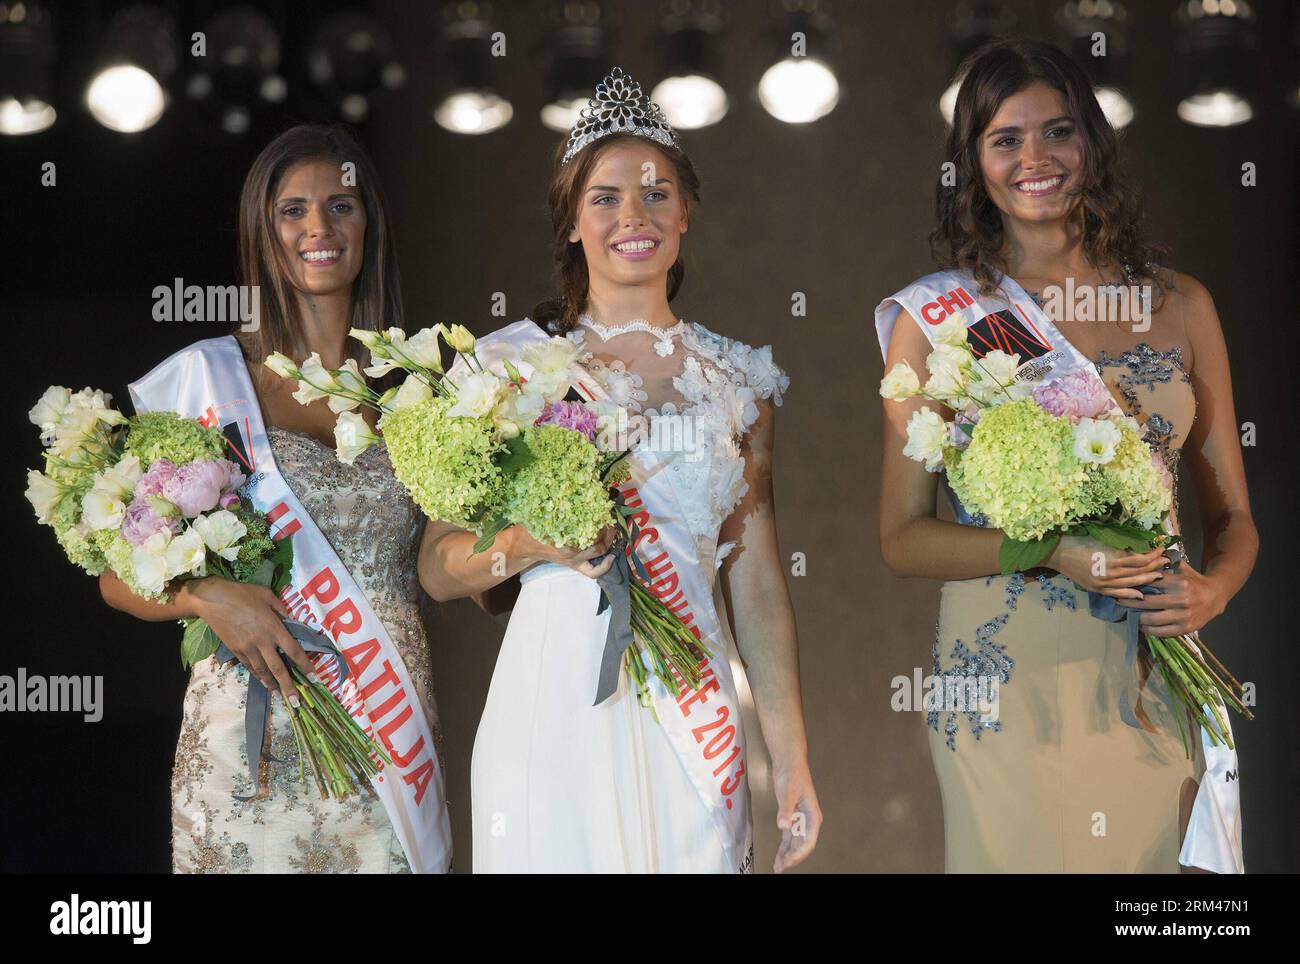 Bildnummer: 60391468  Datum: 24.08.2013  Copyright: imago/Xinhua ZAGREB, August 24, 2013 - Lana Grzetic(C) of Croatia poses with her crown during Miss Croatia 2013 beauty contest held in Zagreb,capital of Croatia, August 24, 2013. Lana Grzetic, 18-year-old student from Rijeka, is crowned as the winner of the Miss Croatia and she will represent Croatia at the 63rd Miss World pageant to be held on Sept. 28 in Indonesia. (Xinhua/Miso Lisanin) CROATIA-ZAGREB-MISS CROATIA BEAUTY CONTEST PUBLICATIONxNOTxINxCHN Gesellschaft Miss Wahl Misswahl Kroatien Schoenheitskoenigin x0x xrj 2013 quer premiumd Stock Photo